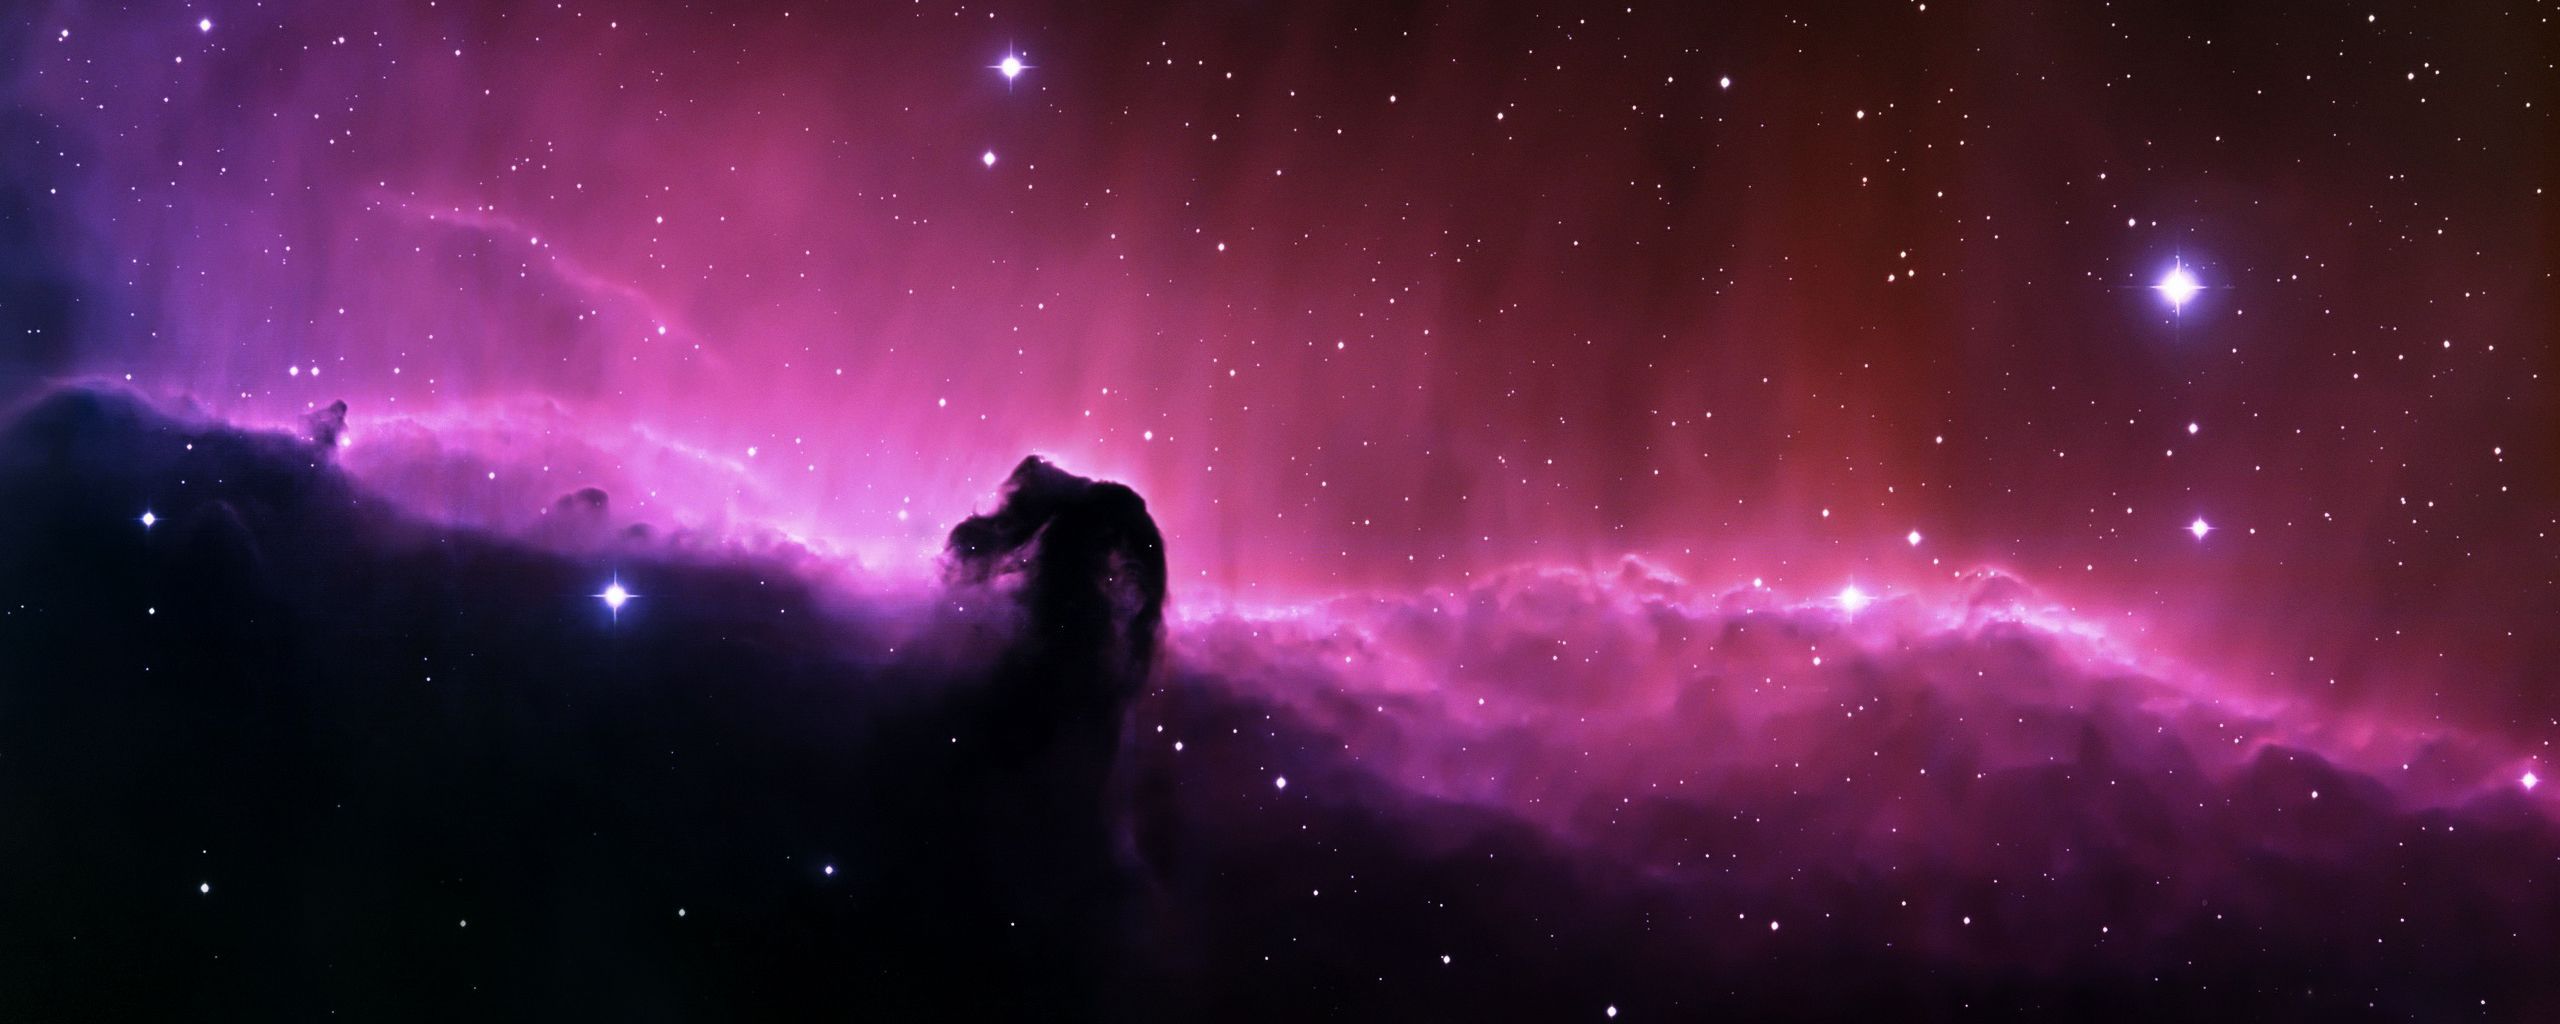 Nebula wallpapers | So, this is what I'm thinking…